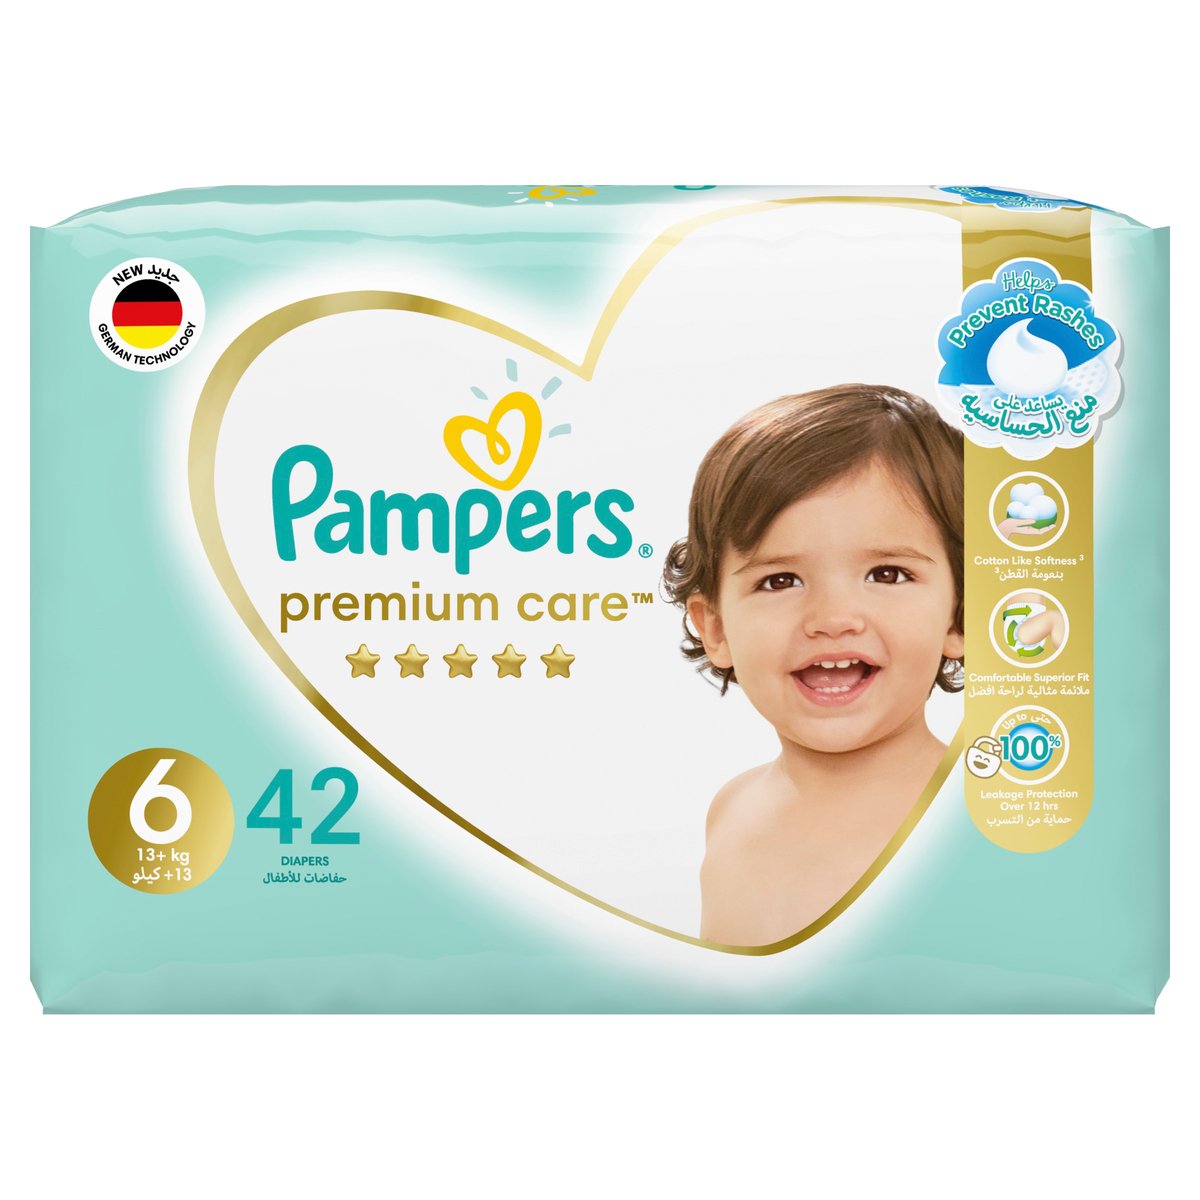 Pampers Premium Care Taped Baby Diapers, Size 6, 13+kg, Unique Softest Absorption for Ultimate Skin Protection, 42 pcs